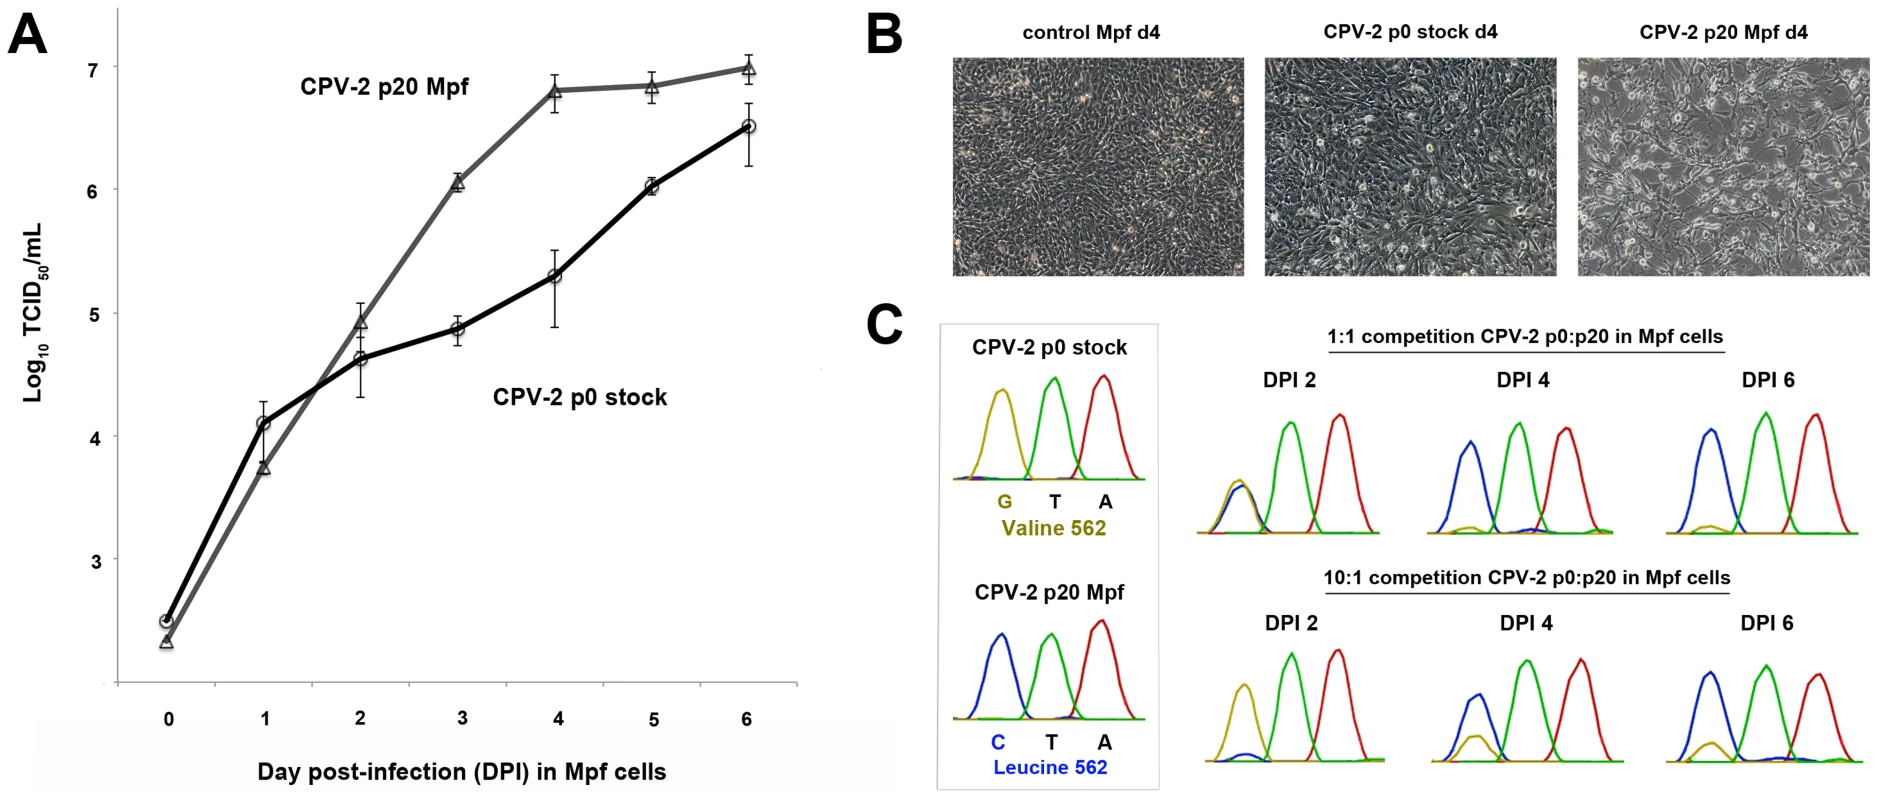 Multi-step single growth curve analysis and competition assays between non-passaged and terminally passaged viruses to detect changes in fitness.